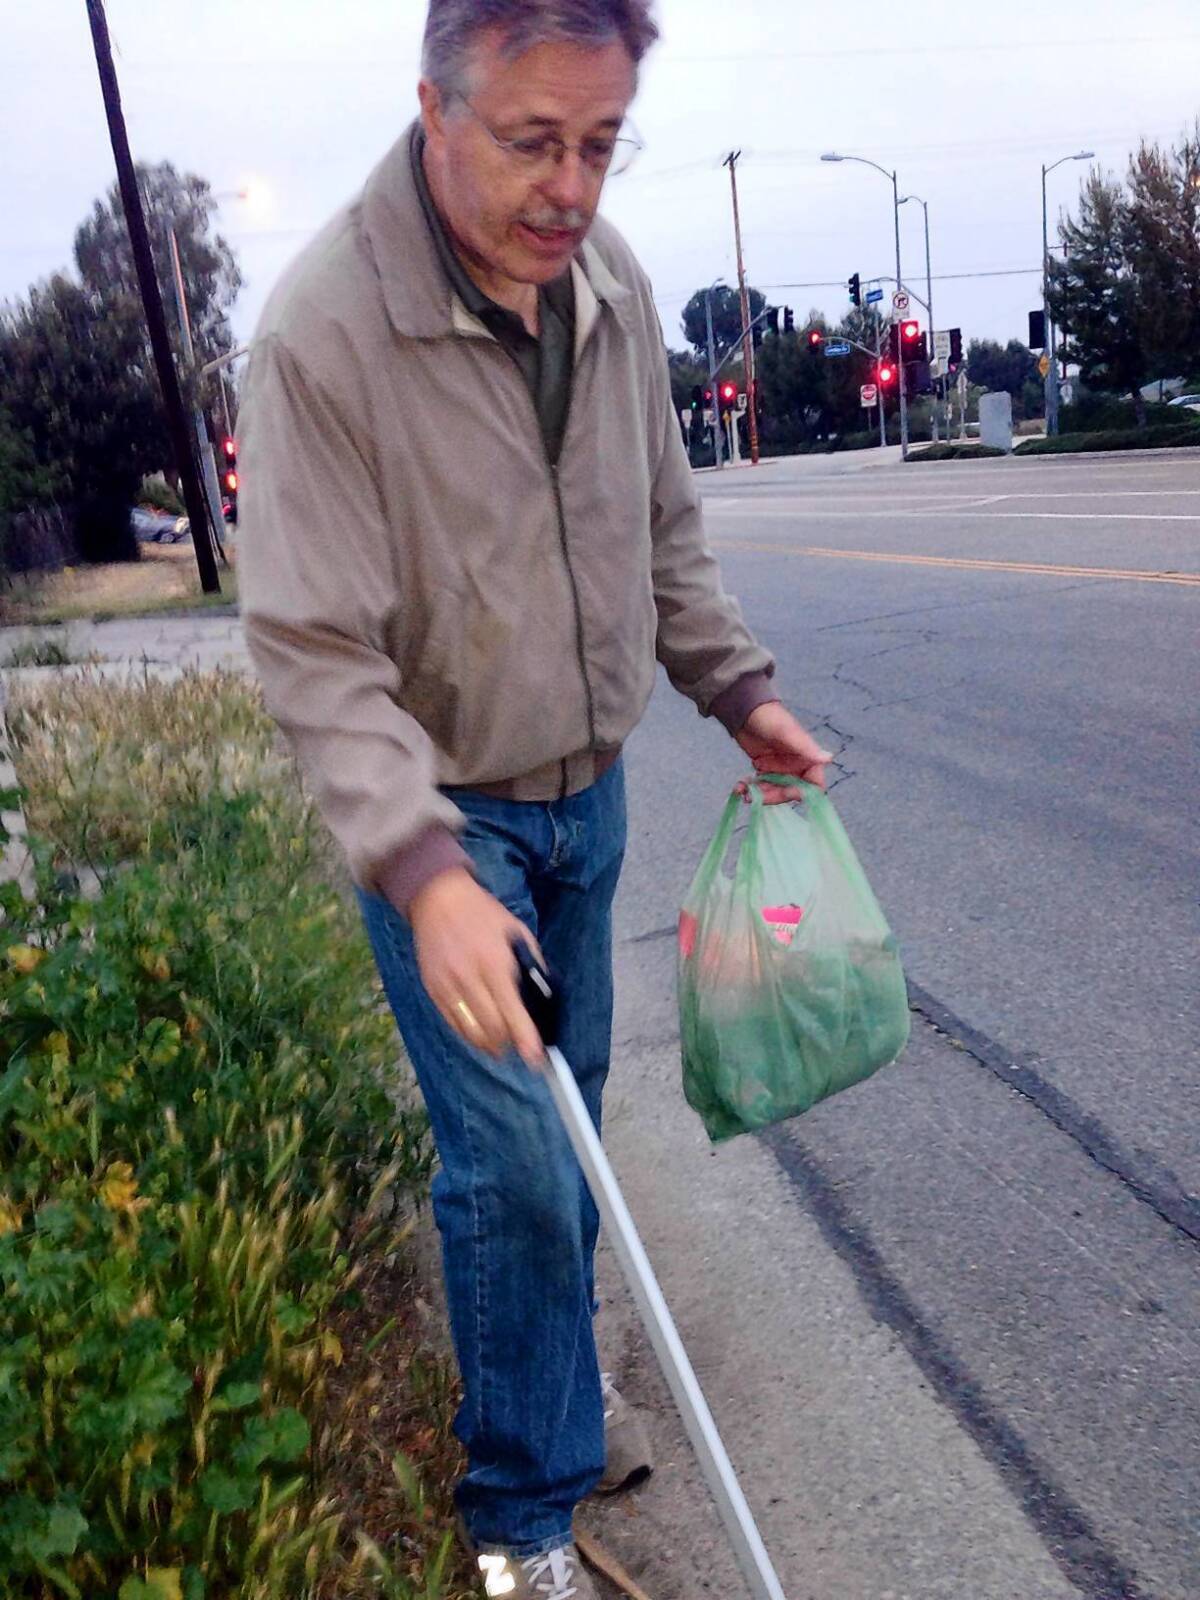 Hans Svanoe, a corporate butler who was gaining weight on a job that required little more activity than making an occasional cup of coffee, took up walking. He then took up litter retrieval. He now fills two to three bags a day with trash collected along the Orange Line busway in Encino.